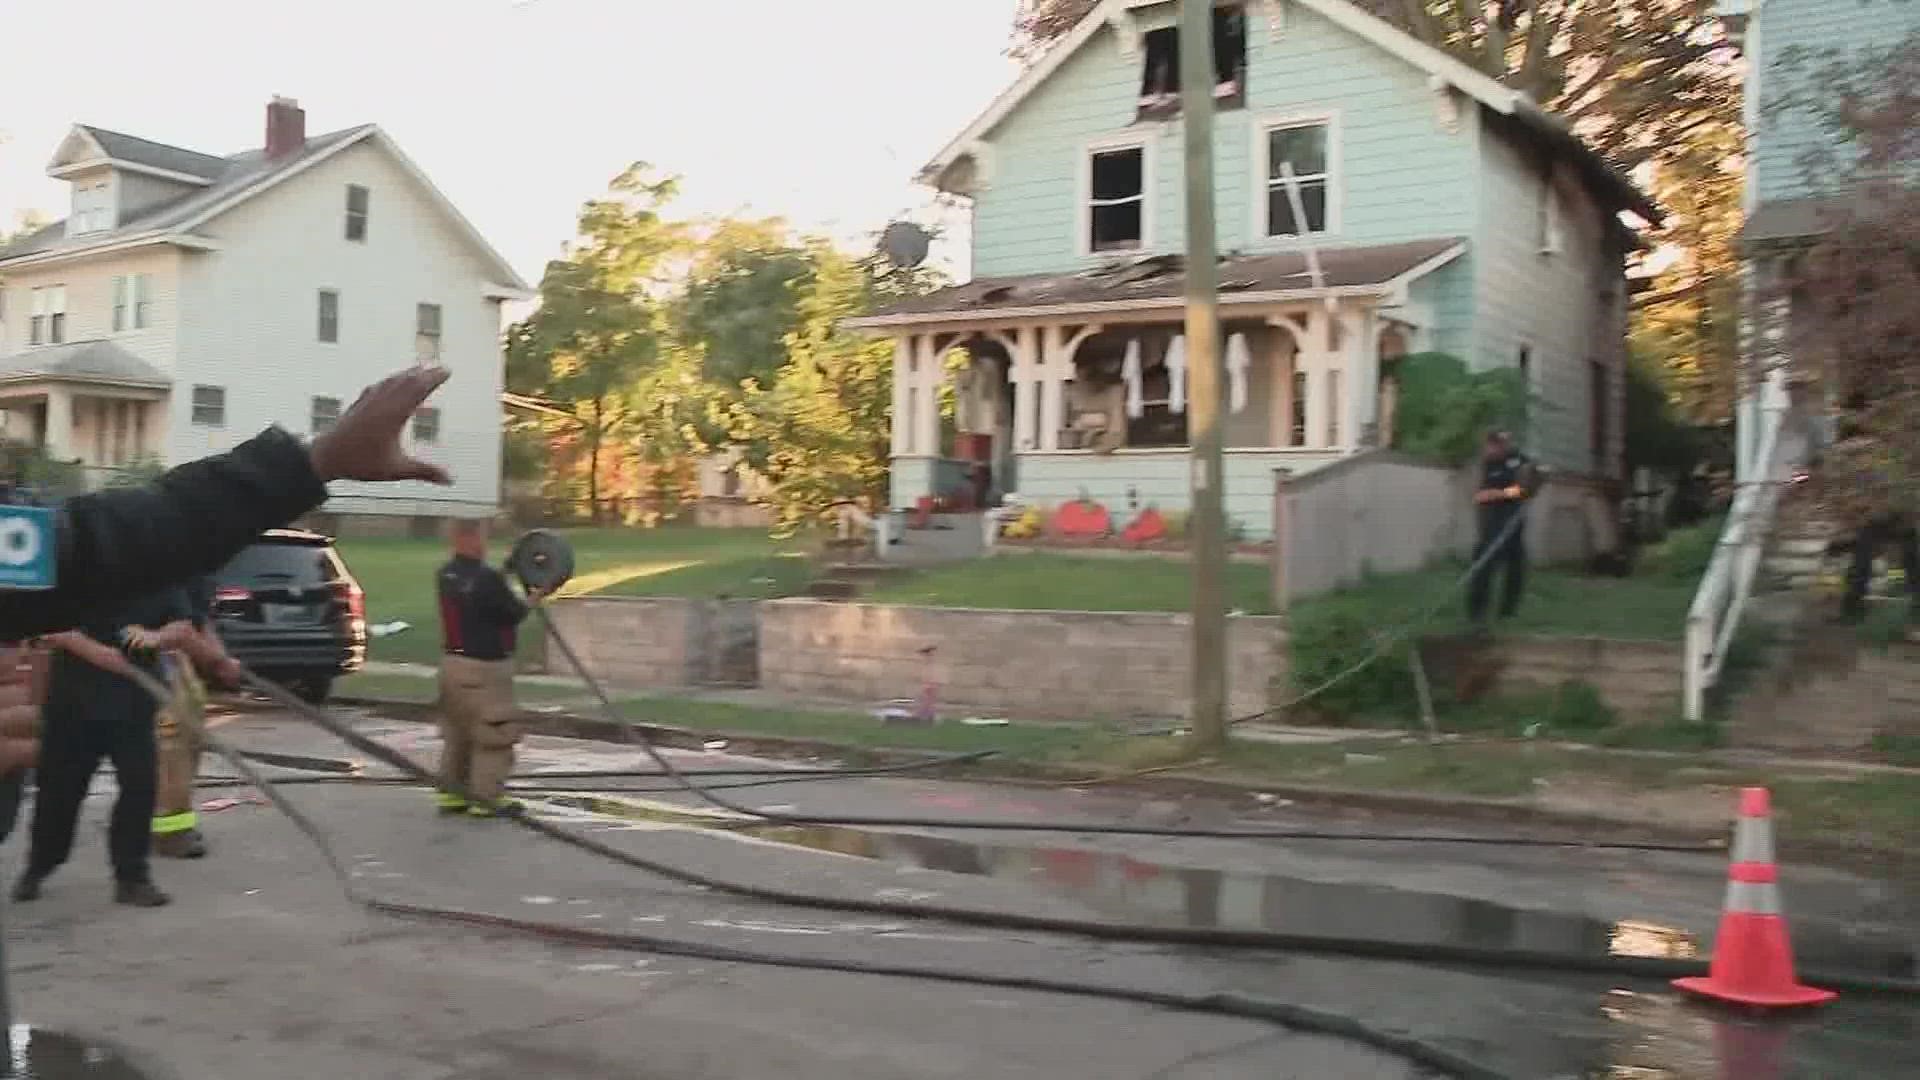 No people were injured in the fire on Lilley Avenue.